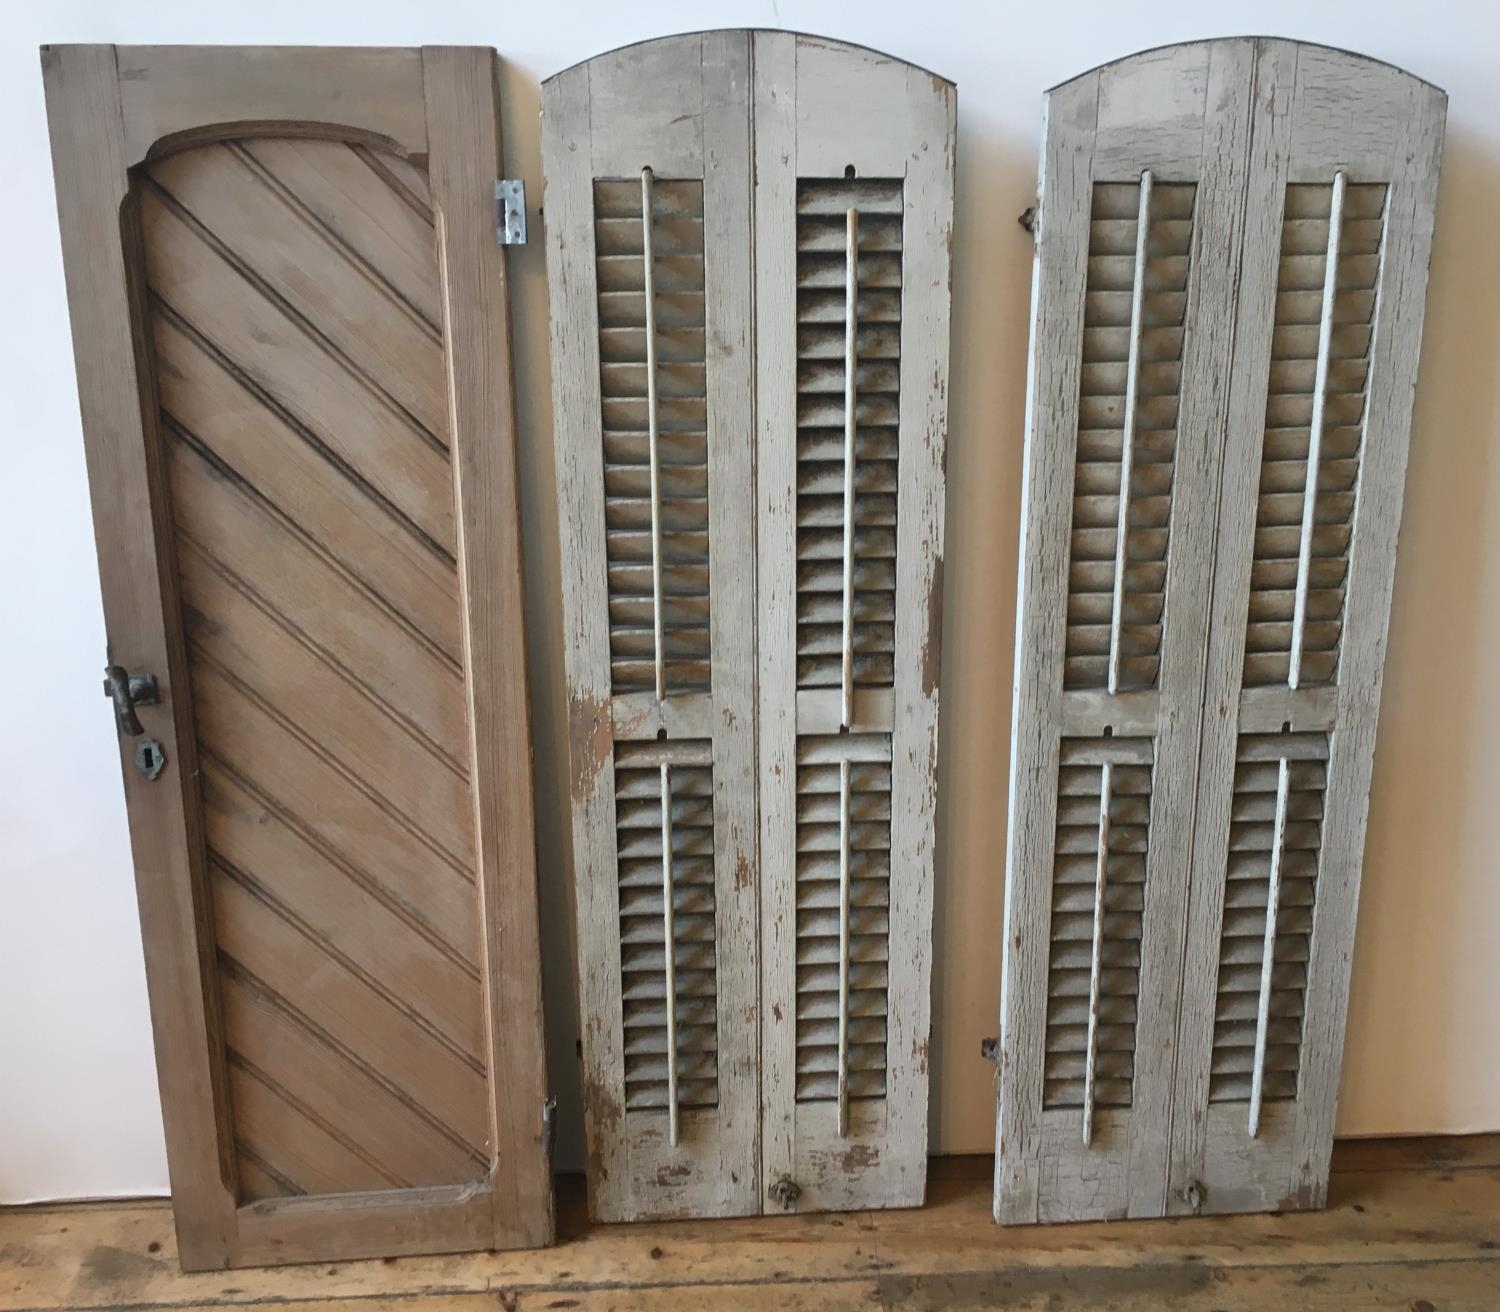 A PAIR OF CREAM PAINTED DISTRESSED WINDOW SHUTTERS (150 x 46cms) AND A PINE WINDOW SHUTTER (149 x